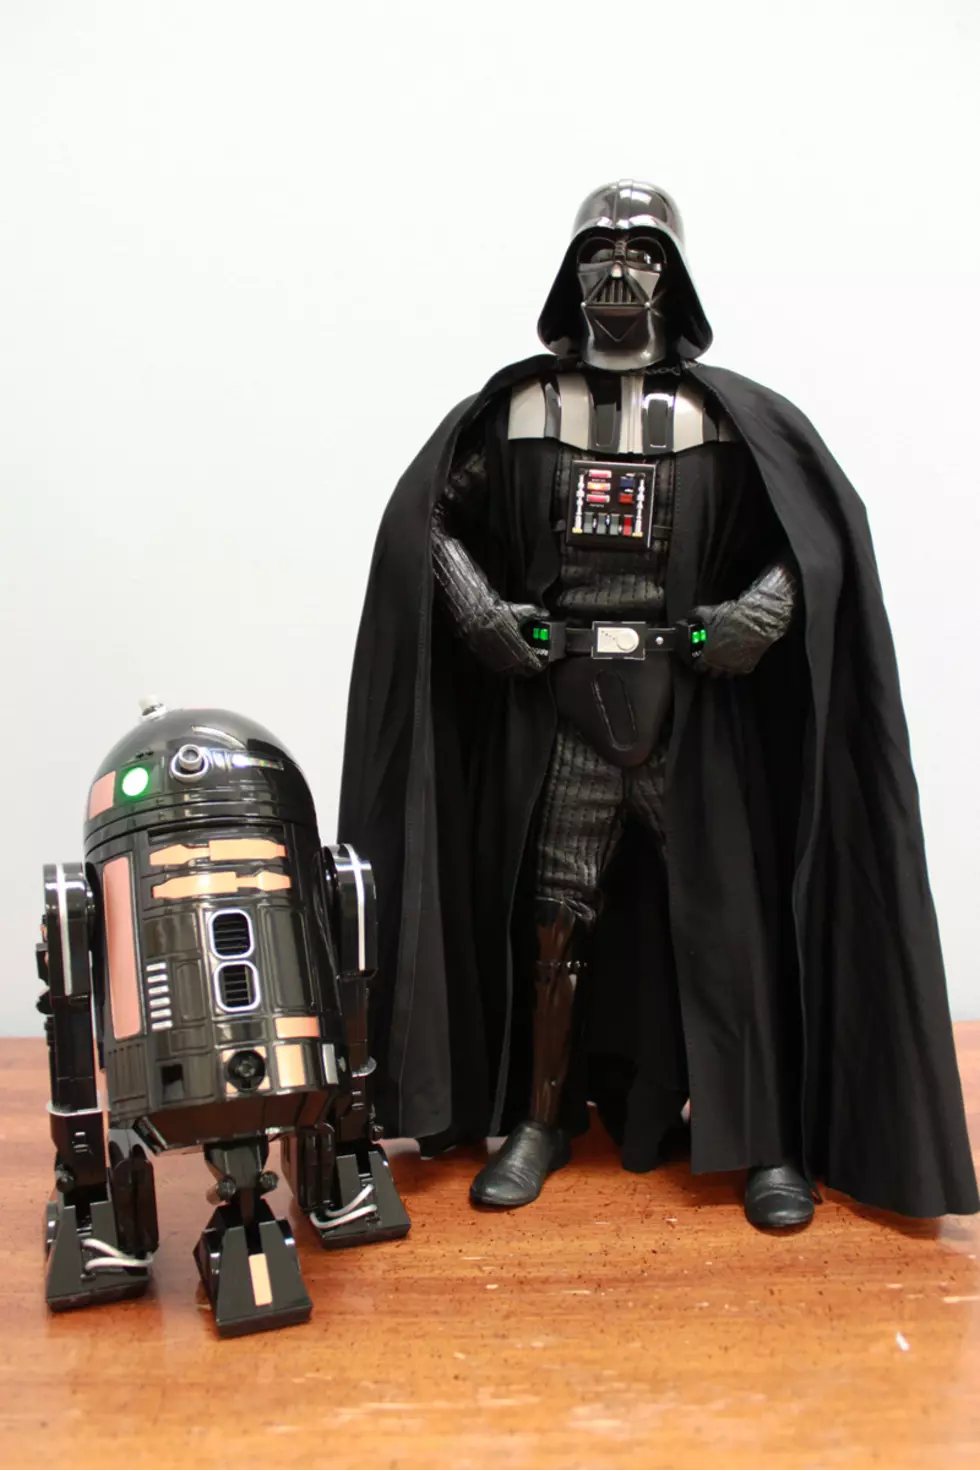 Enter to Win a Darth Vader and R2-Q5 Figure Set